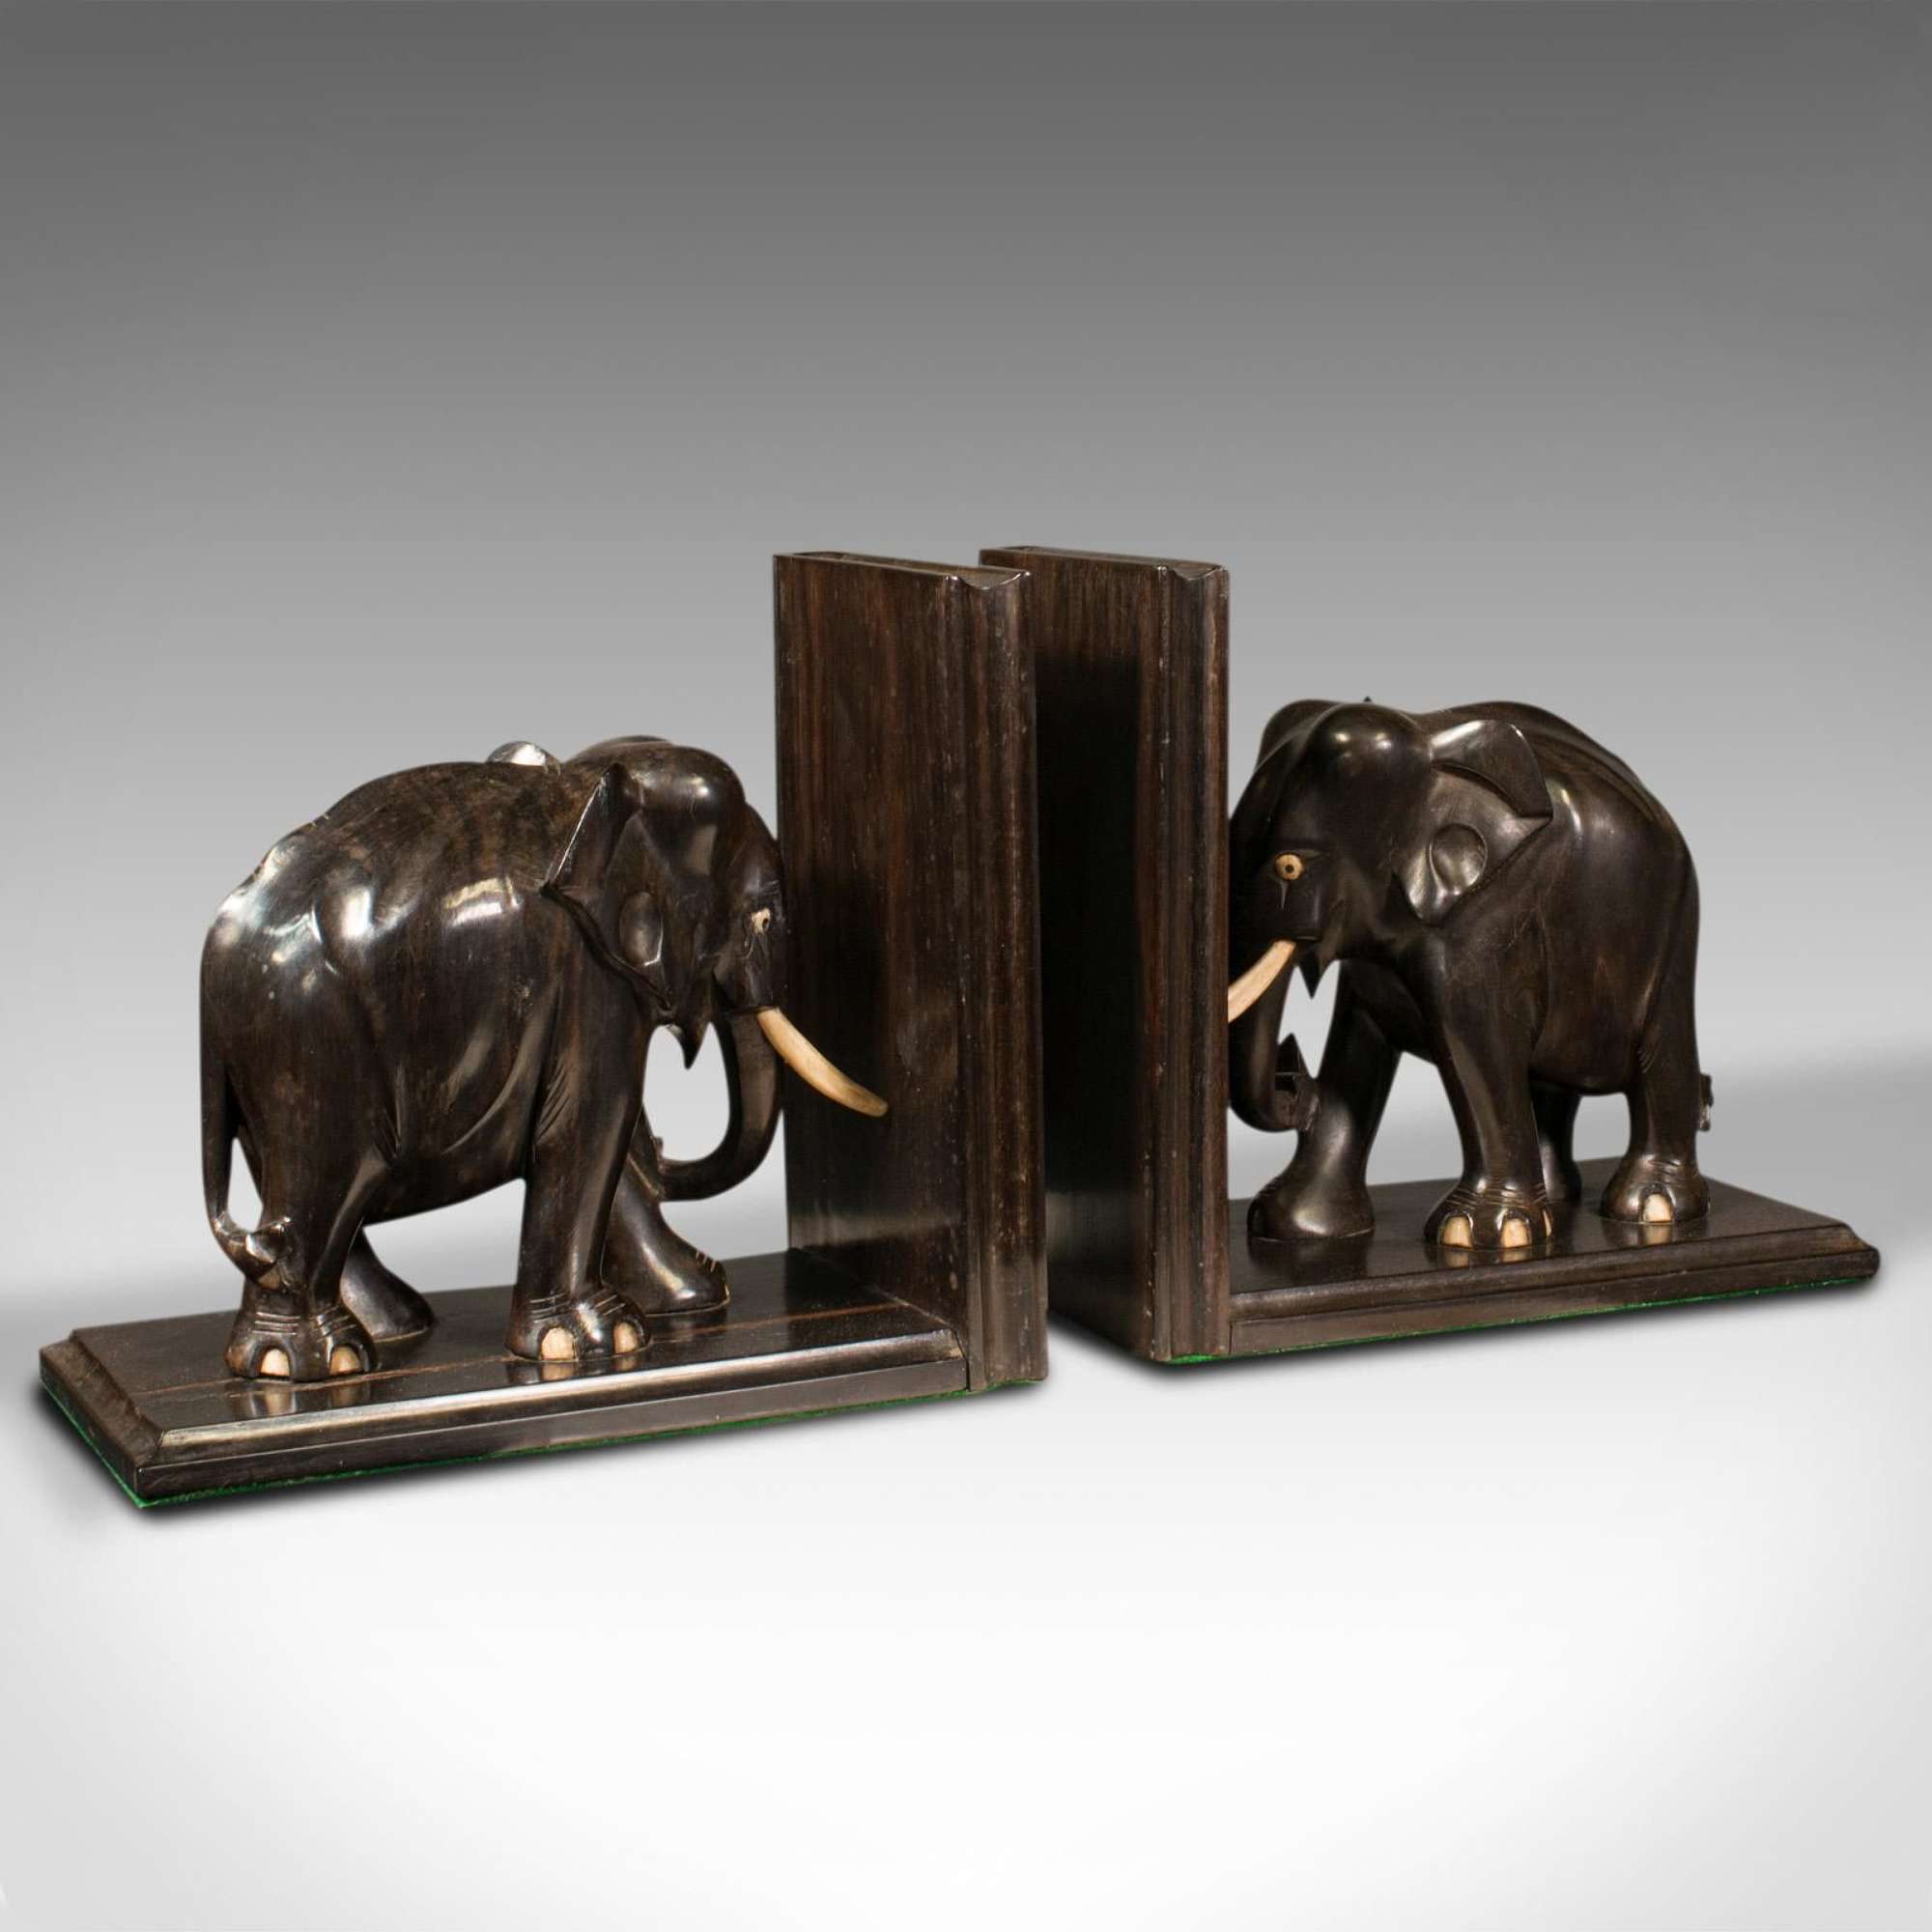 Pair Of Antique Elephant Bookends, Anglo Indian, Ebony, Decorative, Book Rest